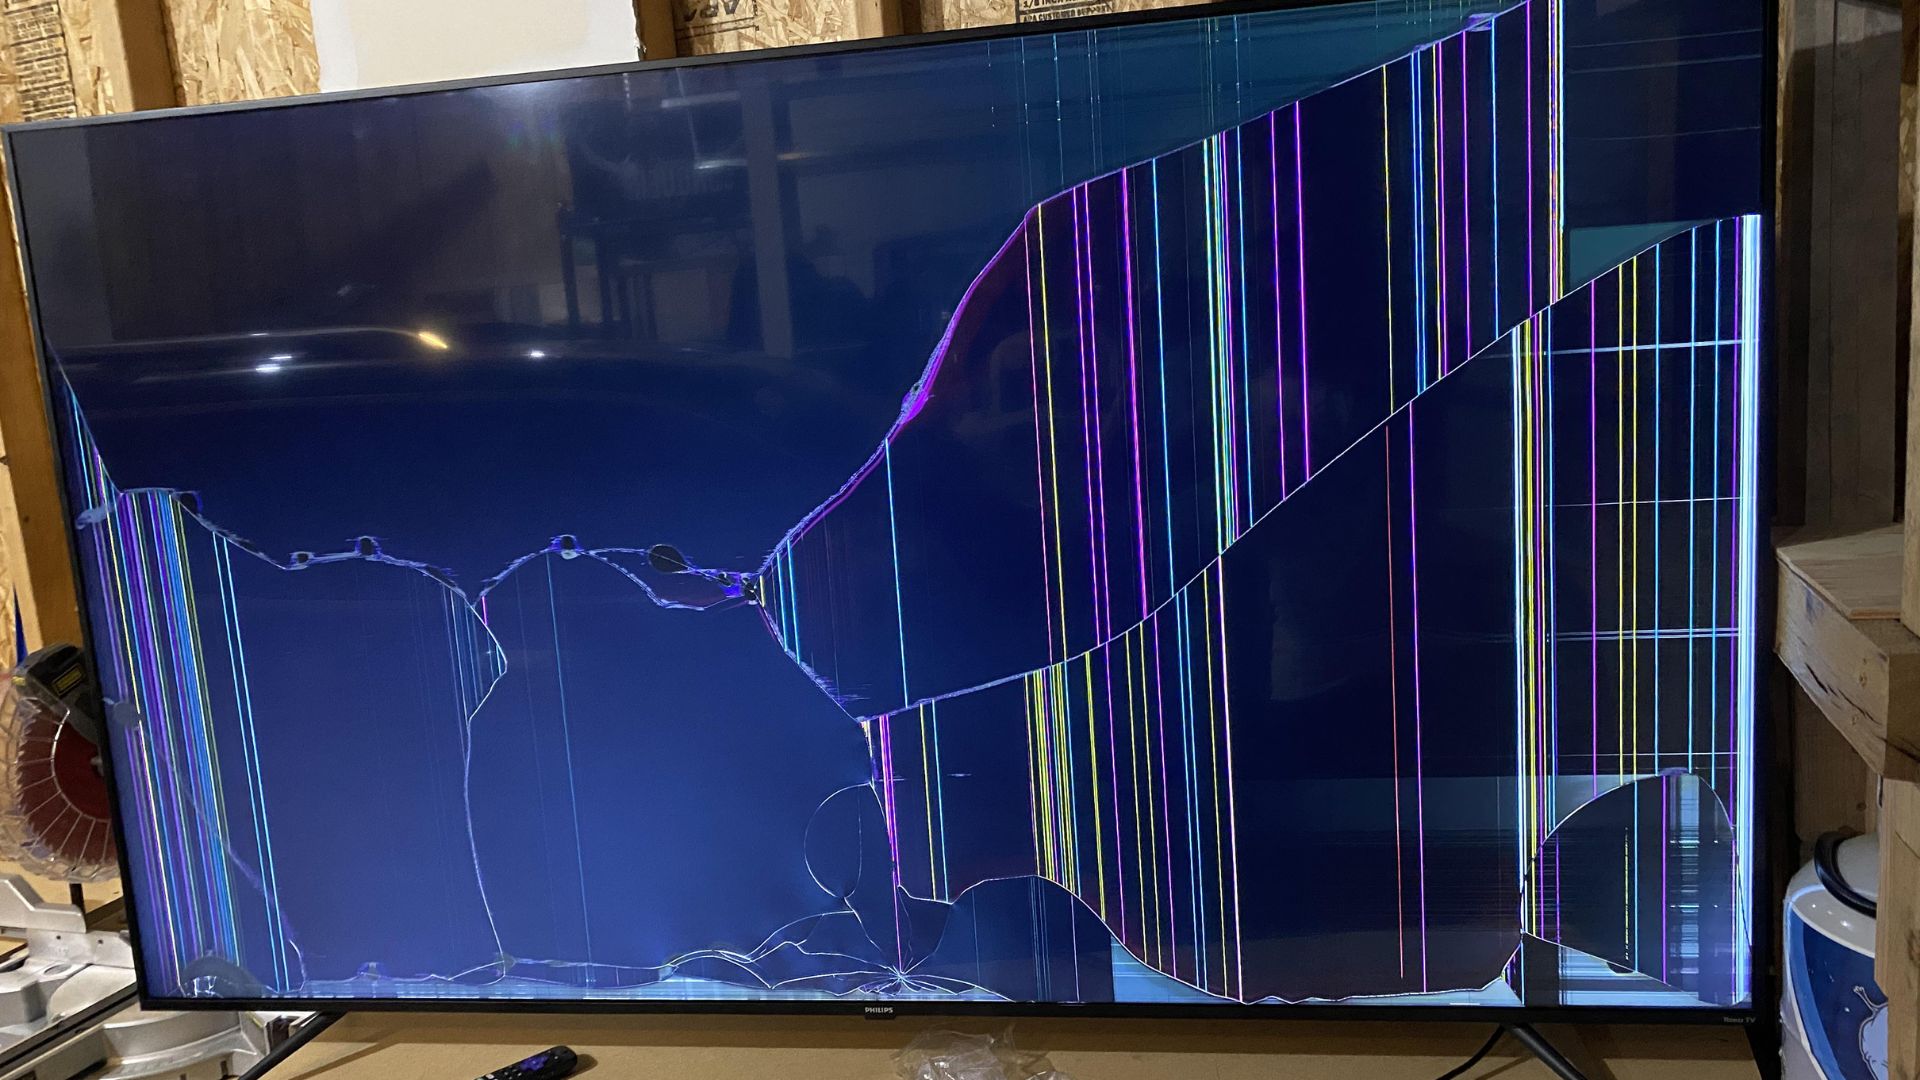 What To Do With Broken LED TV